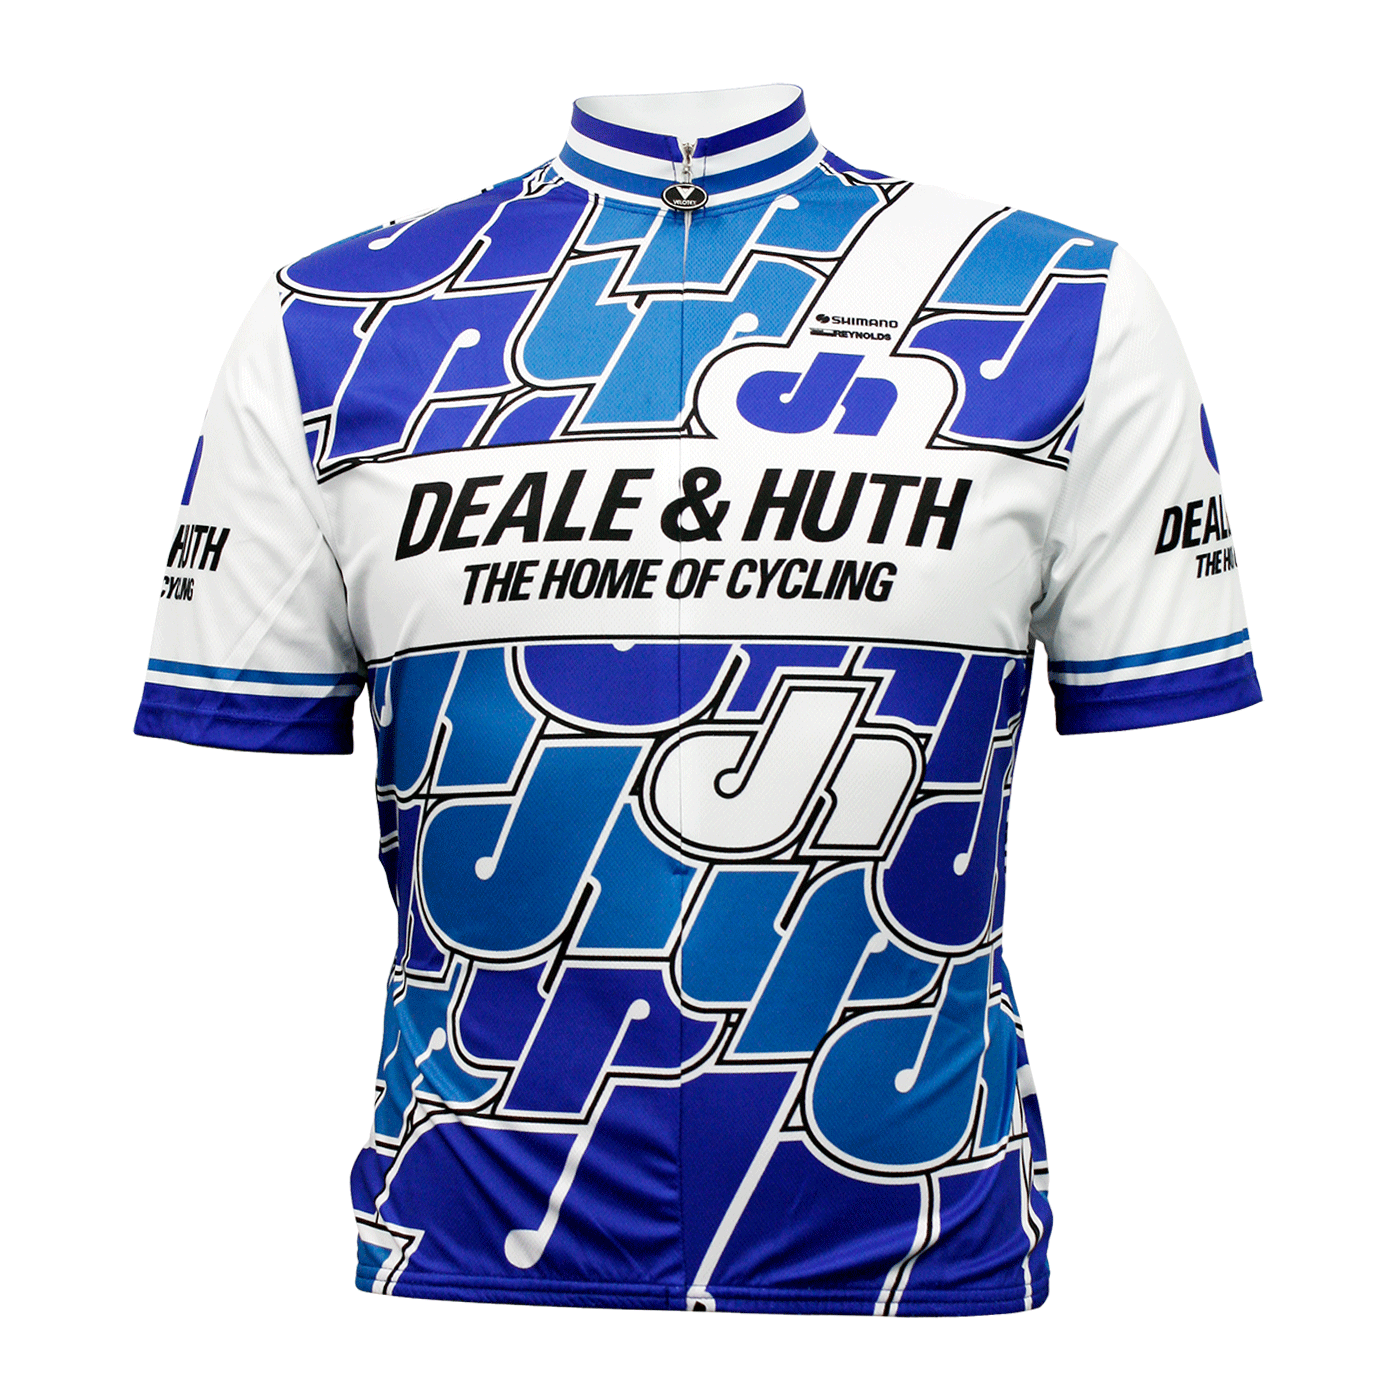 Deale & Huth Retro Cycling Jersey Vento